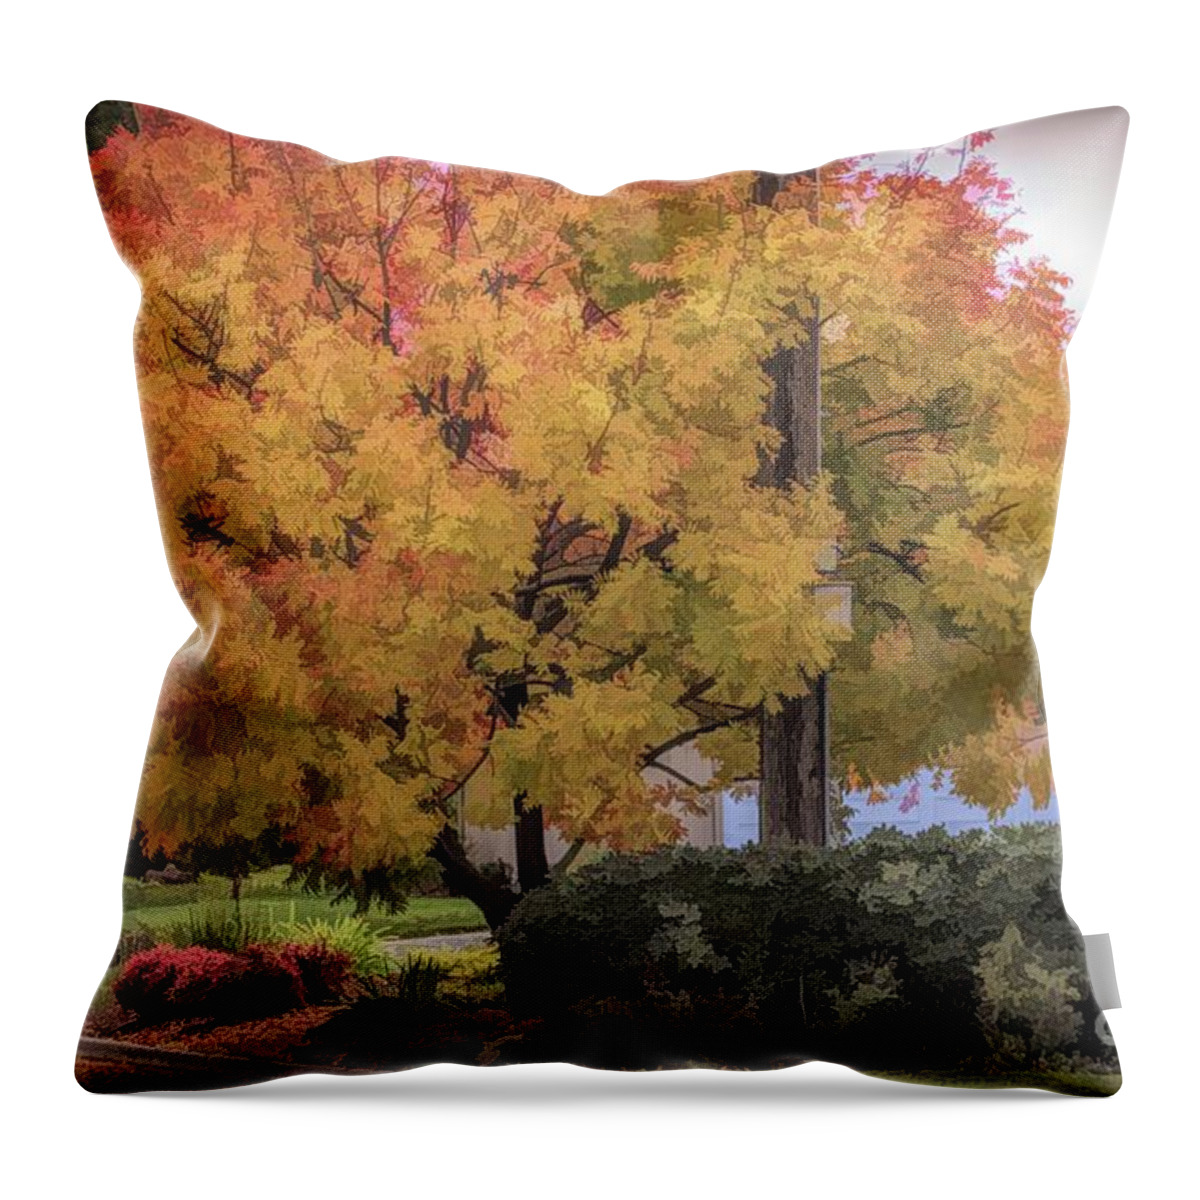 Autumn Throw Pillow featuring the digital art Brilliant Fall Color Tree Yellows Oranges Seasons by Chuck Kuhn